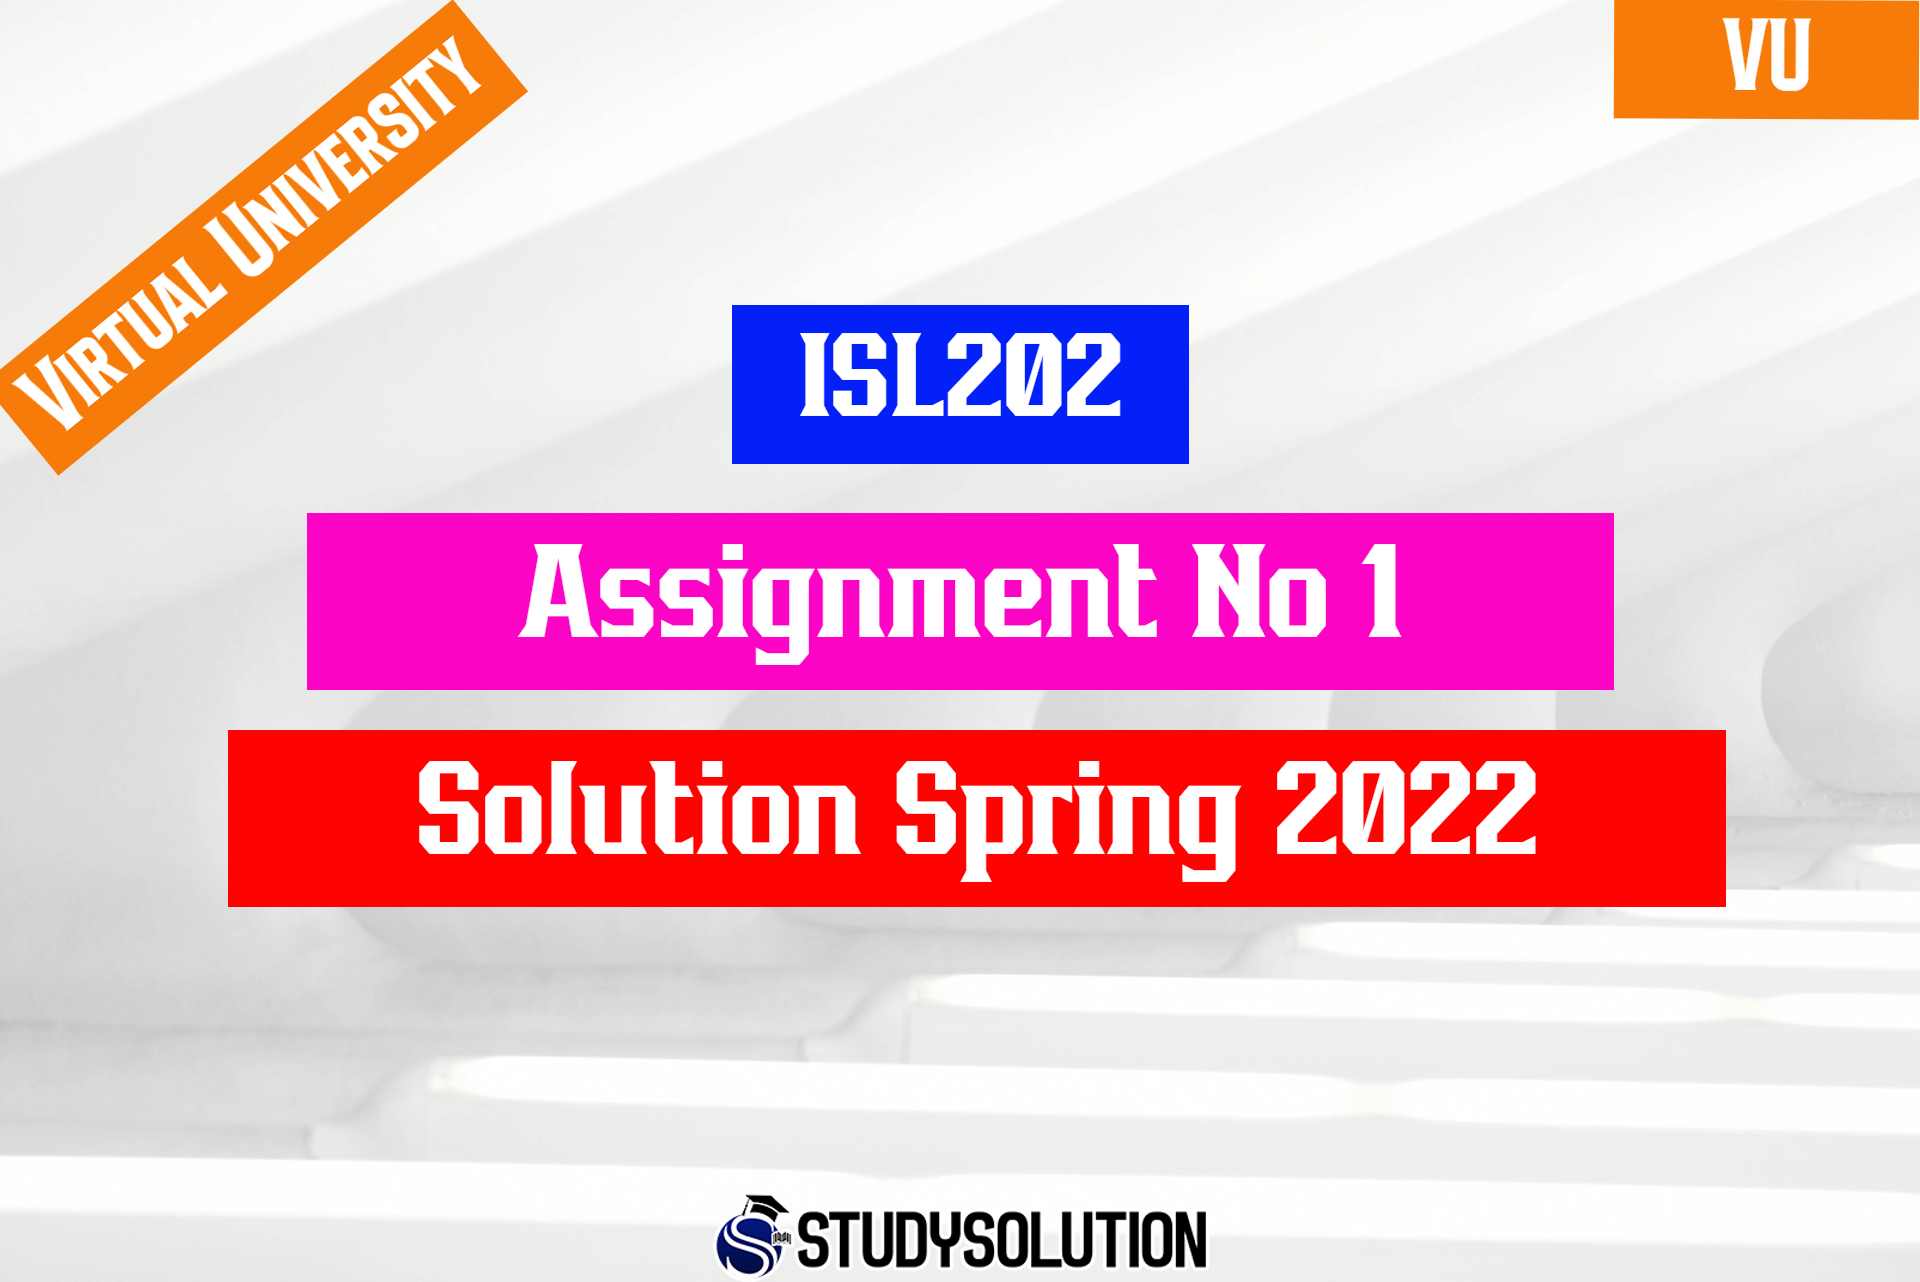 ISL202 Assignment No 1 Solution Spring 2022